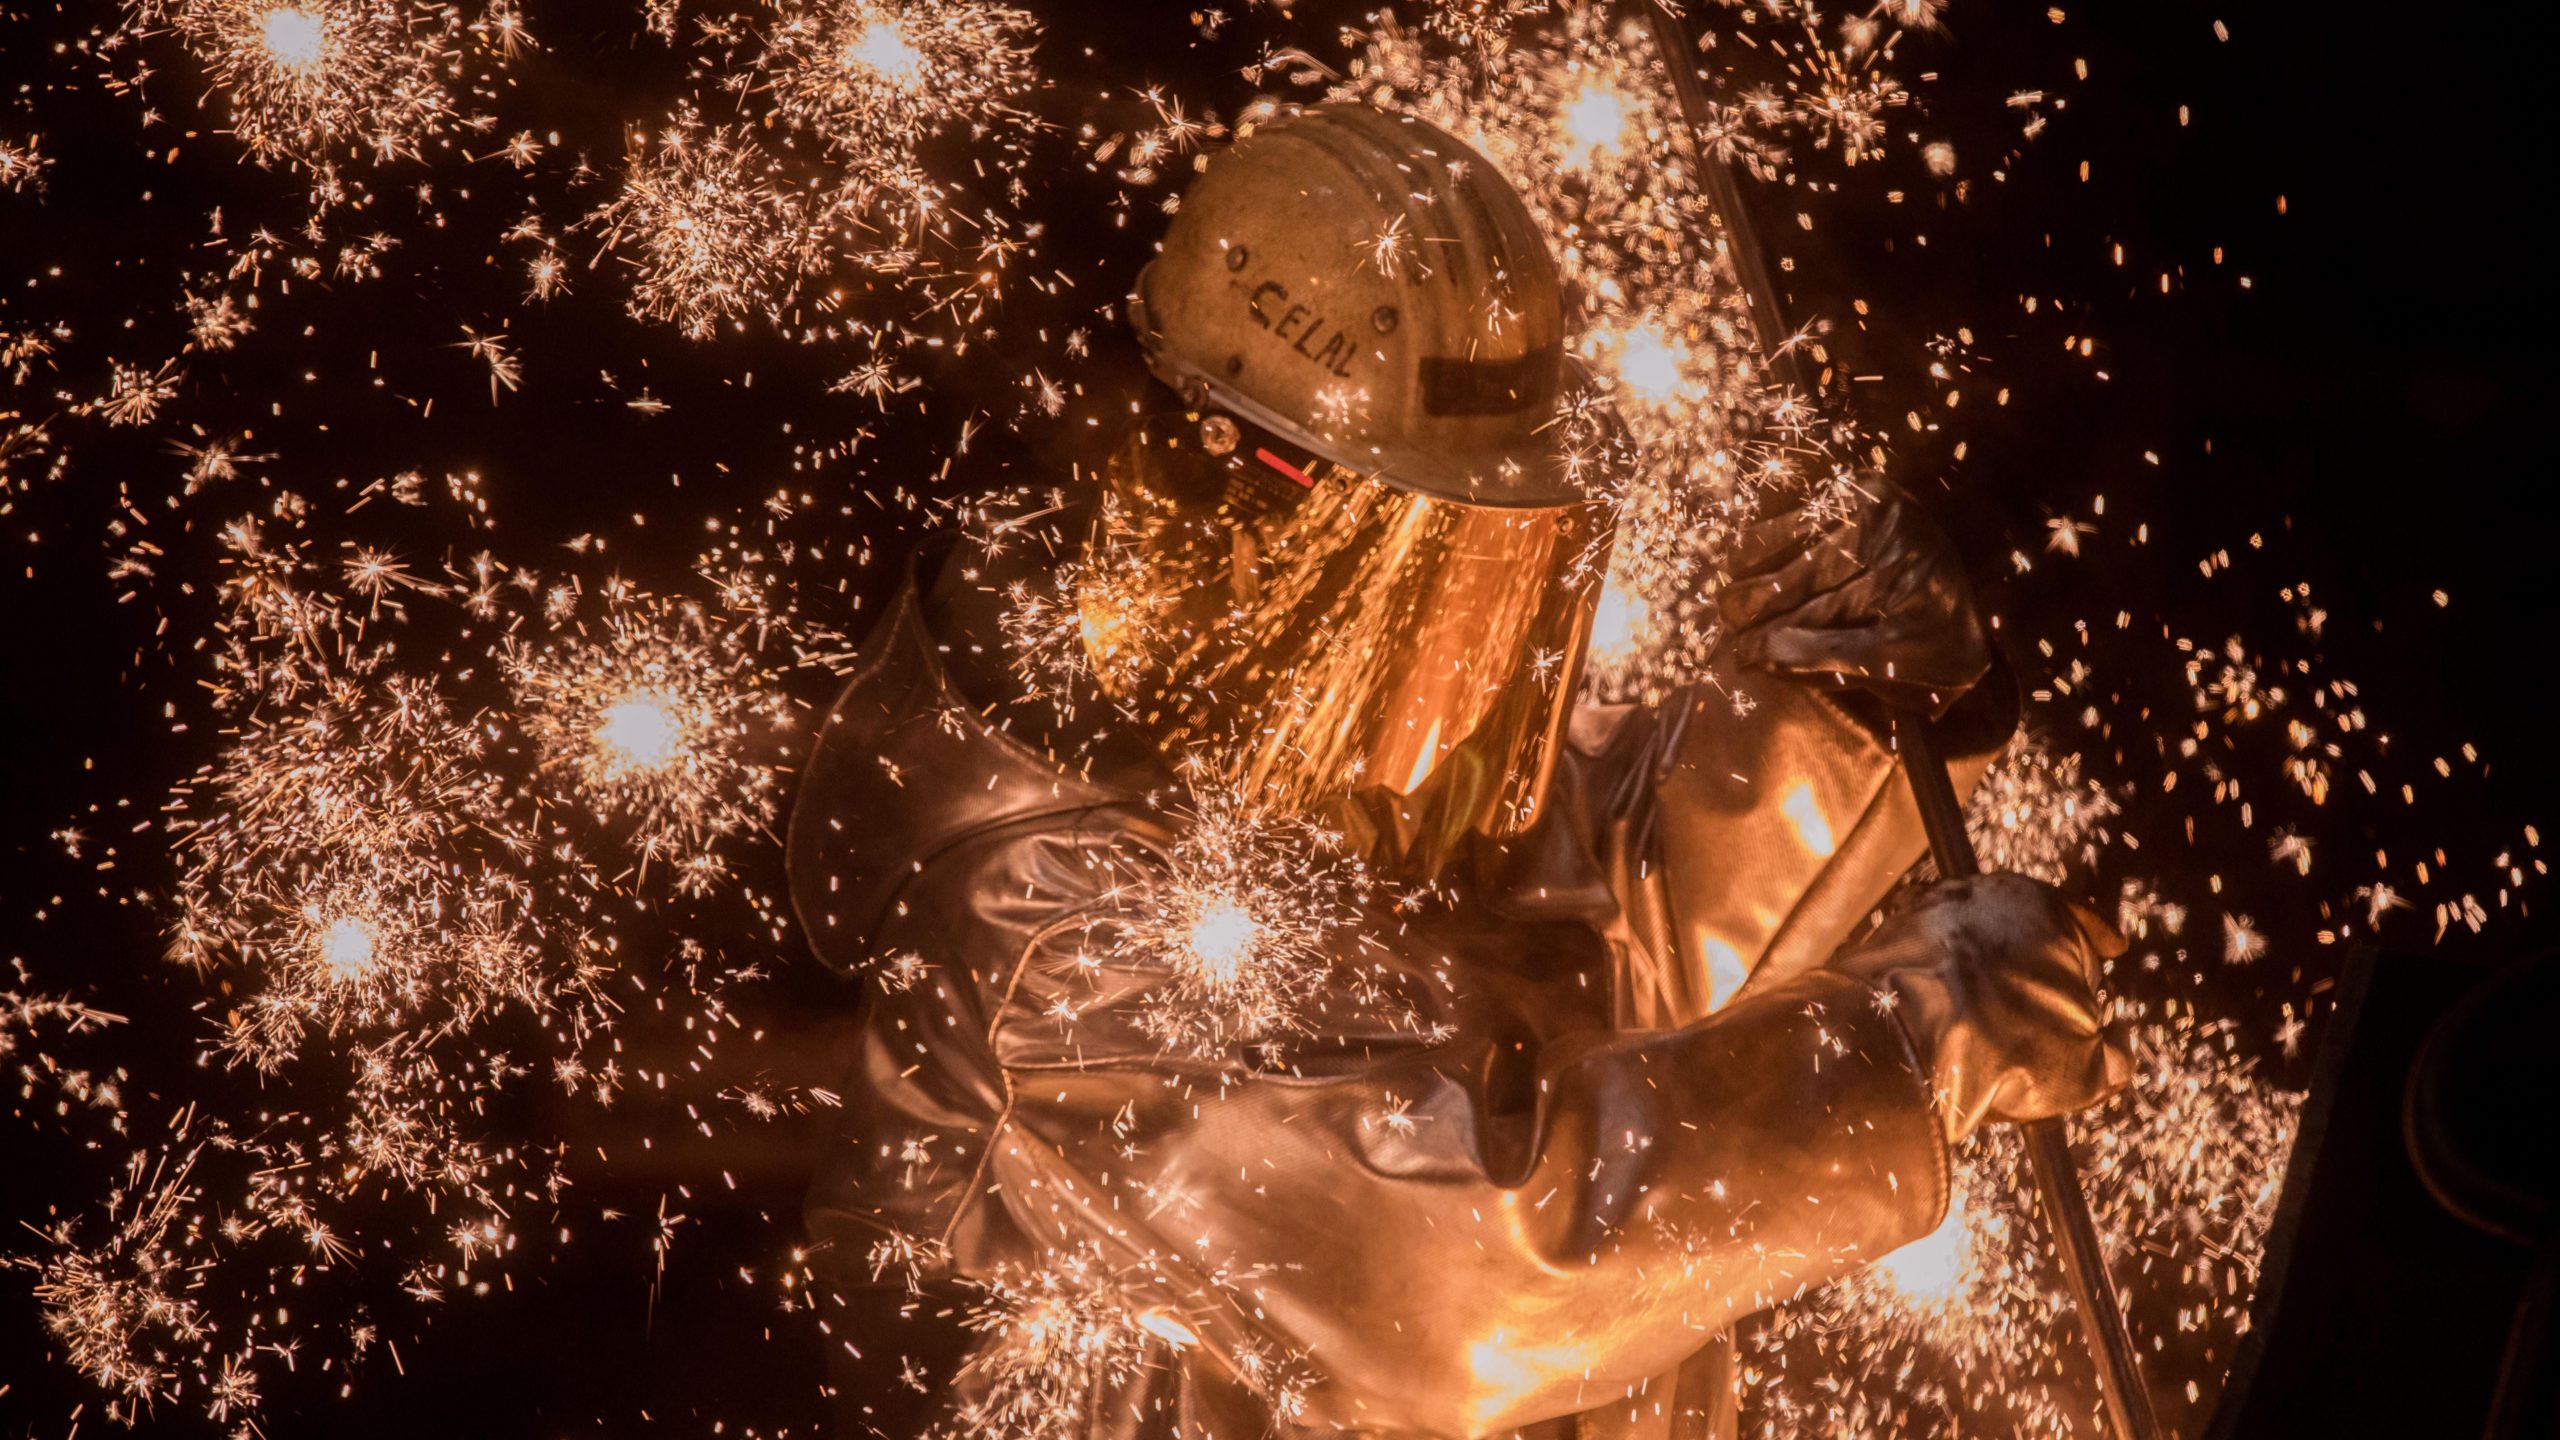 Sparks fly as a worker takes a sample of molten iron flowing from a blast furnace at the Thyssenkrupp Steel Europe steelworks in Germany. (Photo: Sean Gallup, Getty Images)